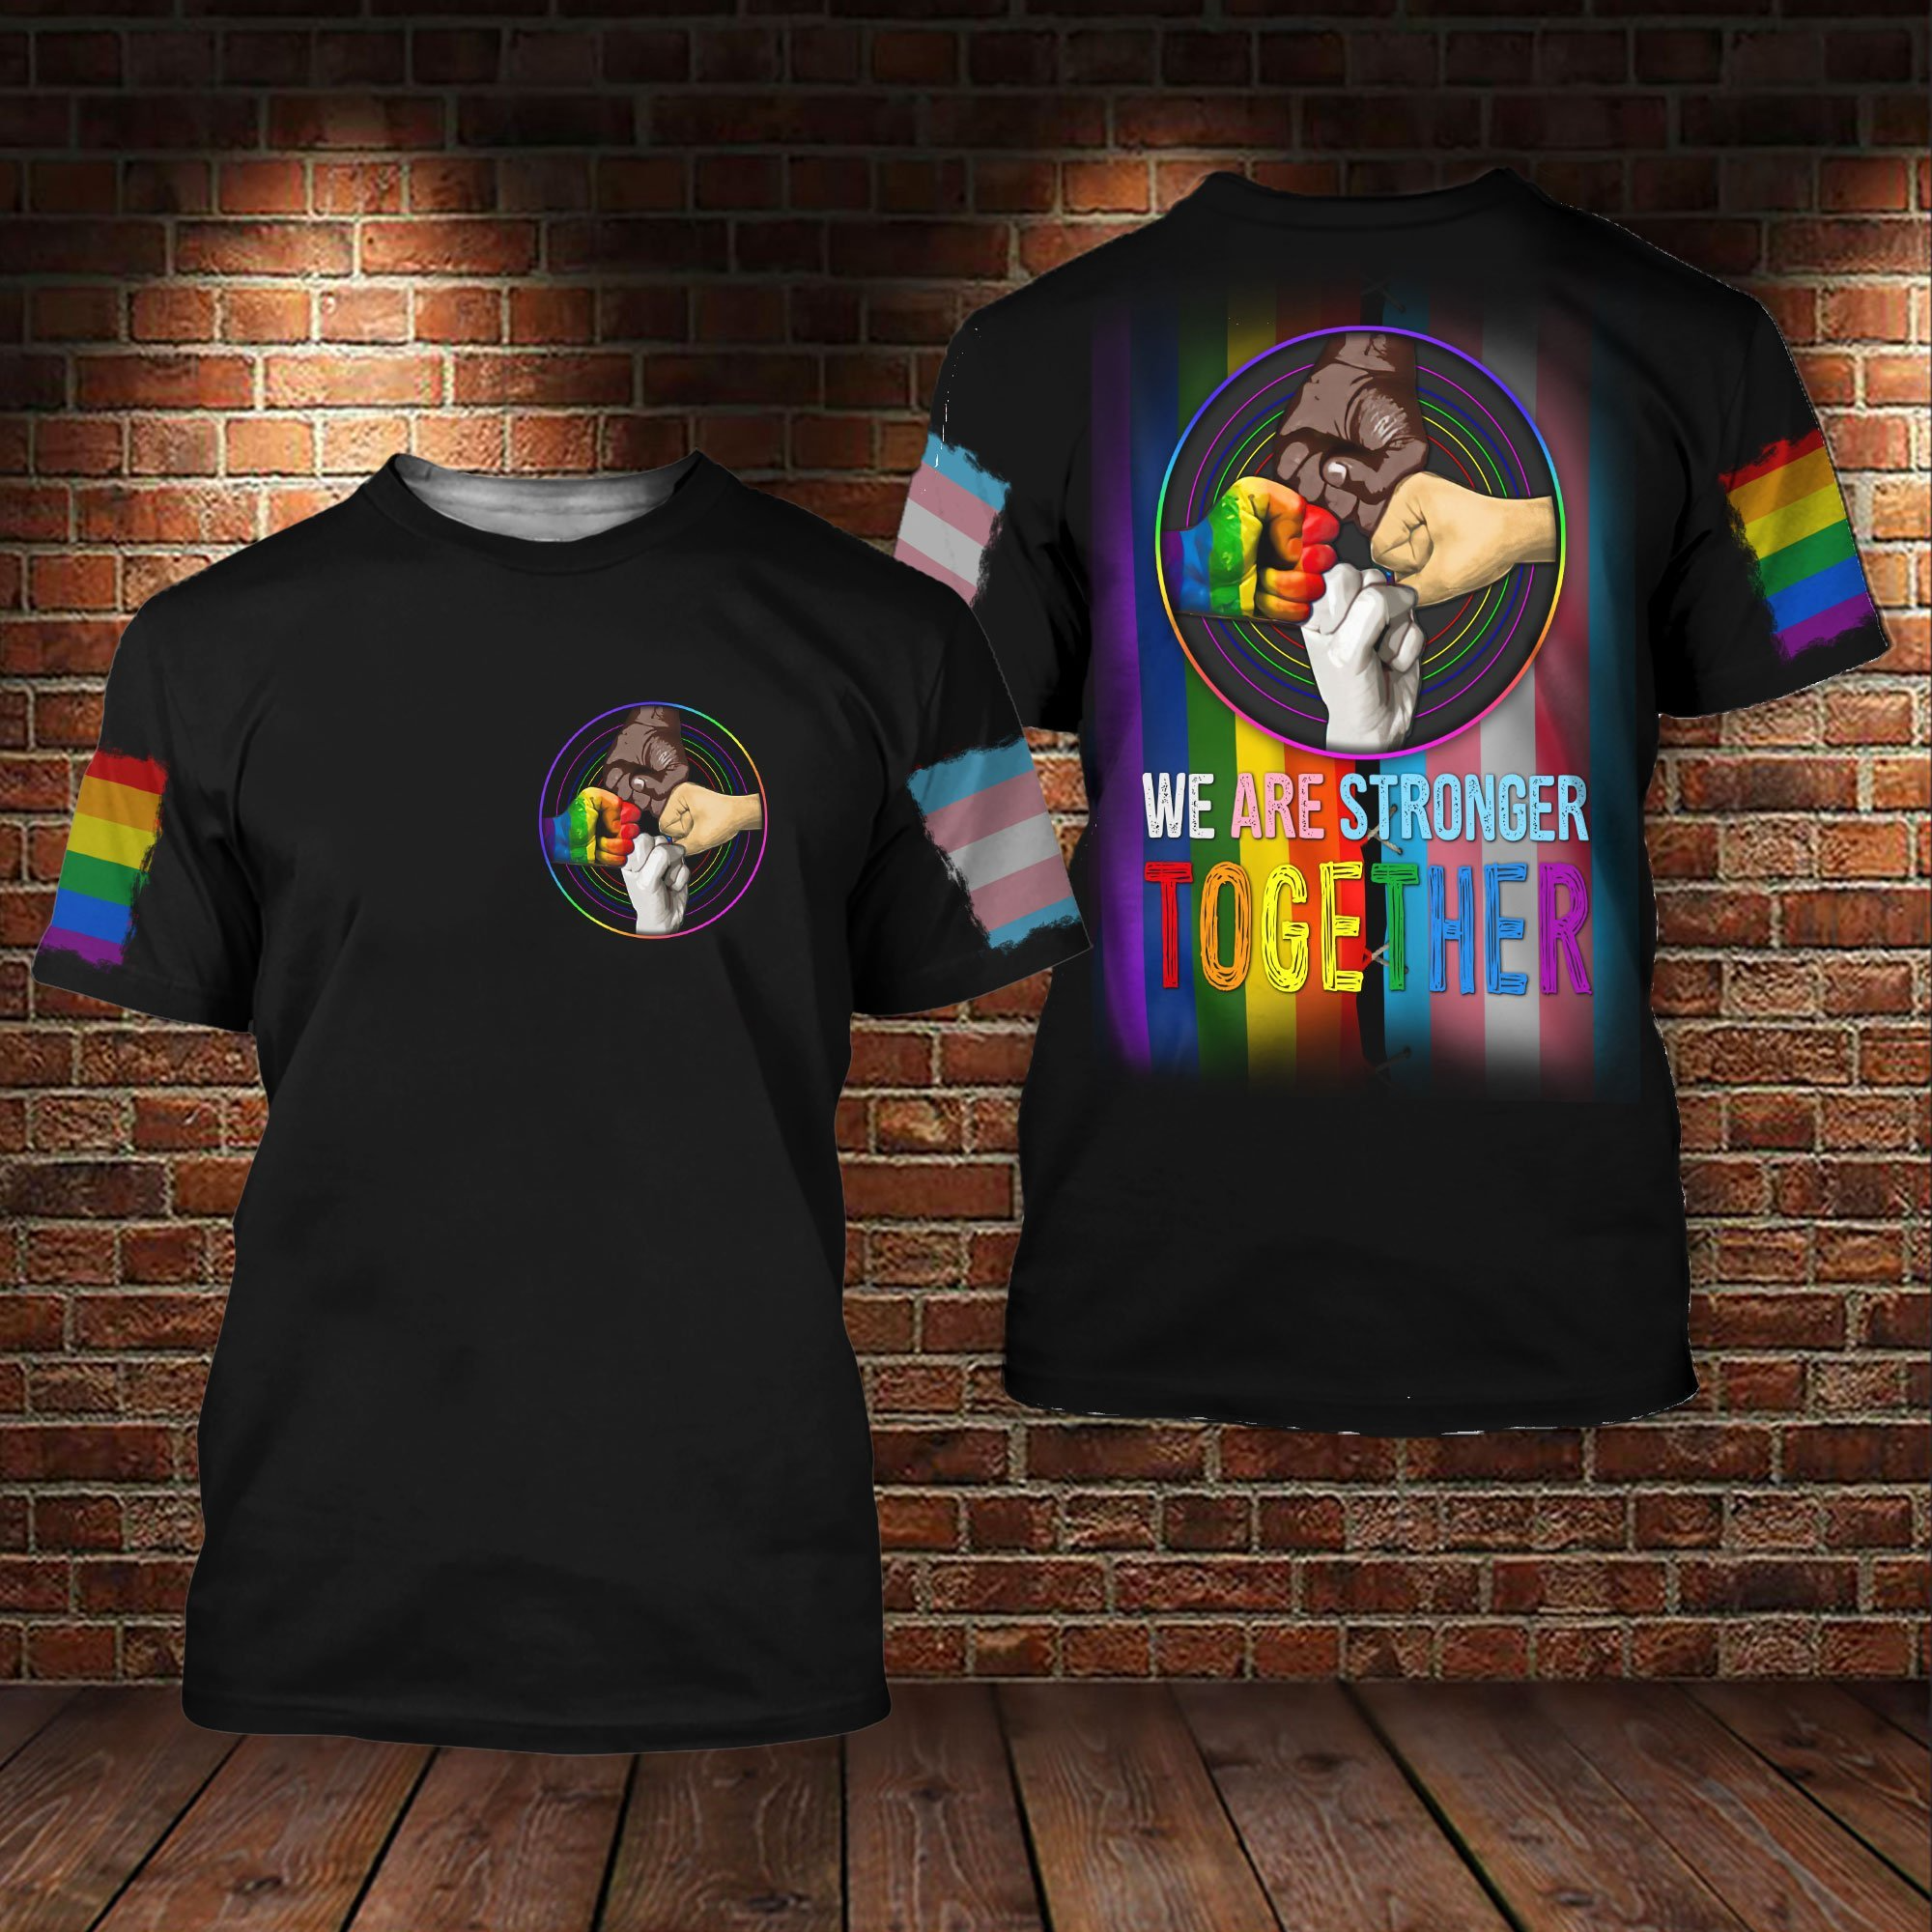 LGBT We Are Stronger Together 3D All Over Printed Shirt For LGBT Community/ Happy LGBT History Month